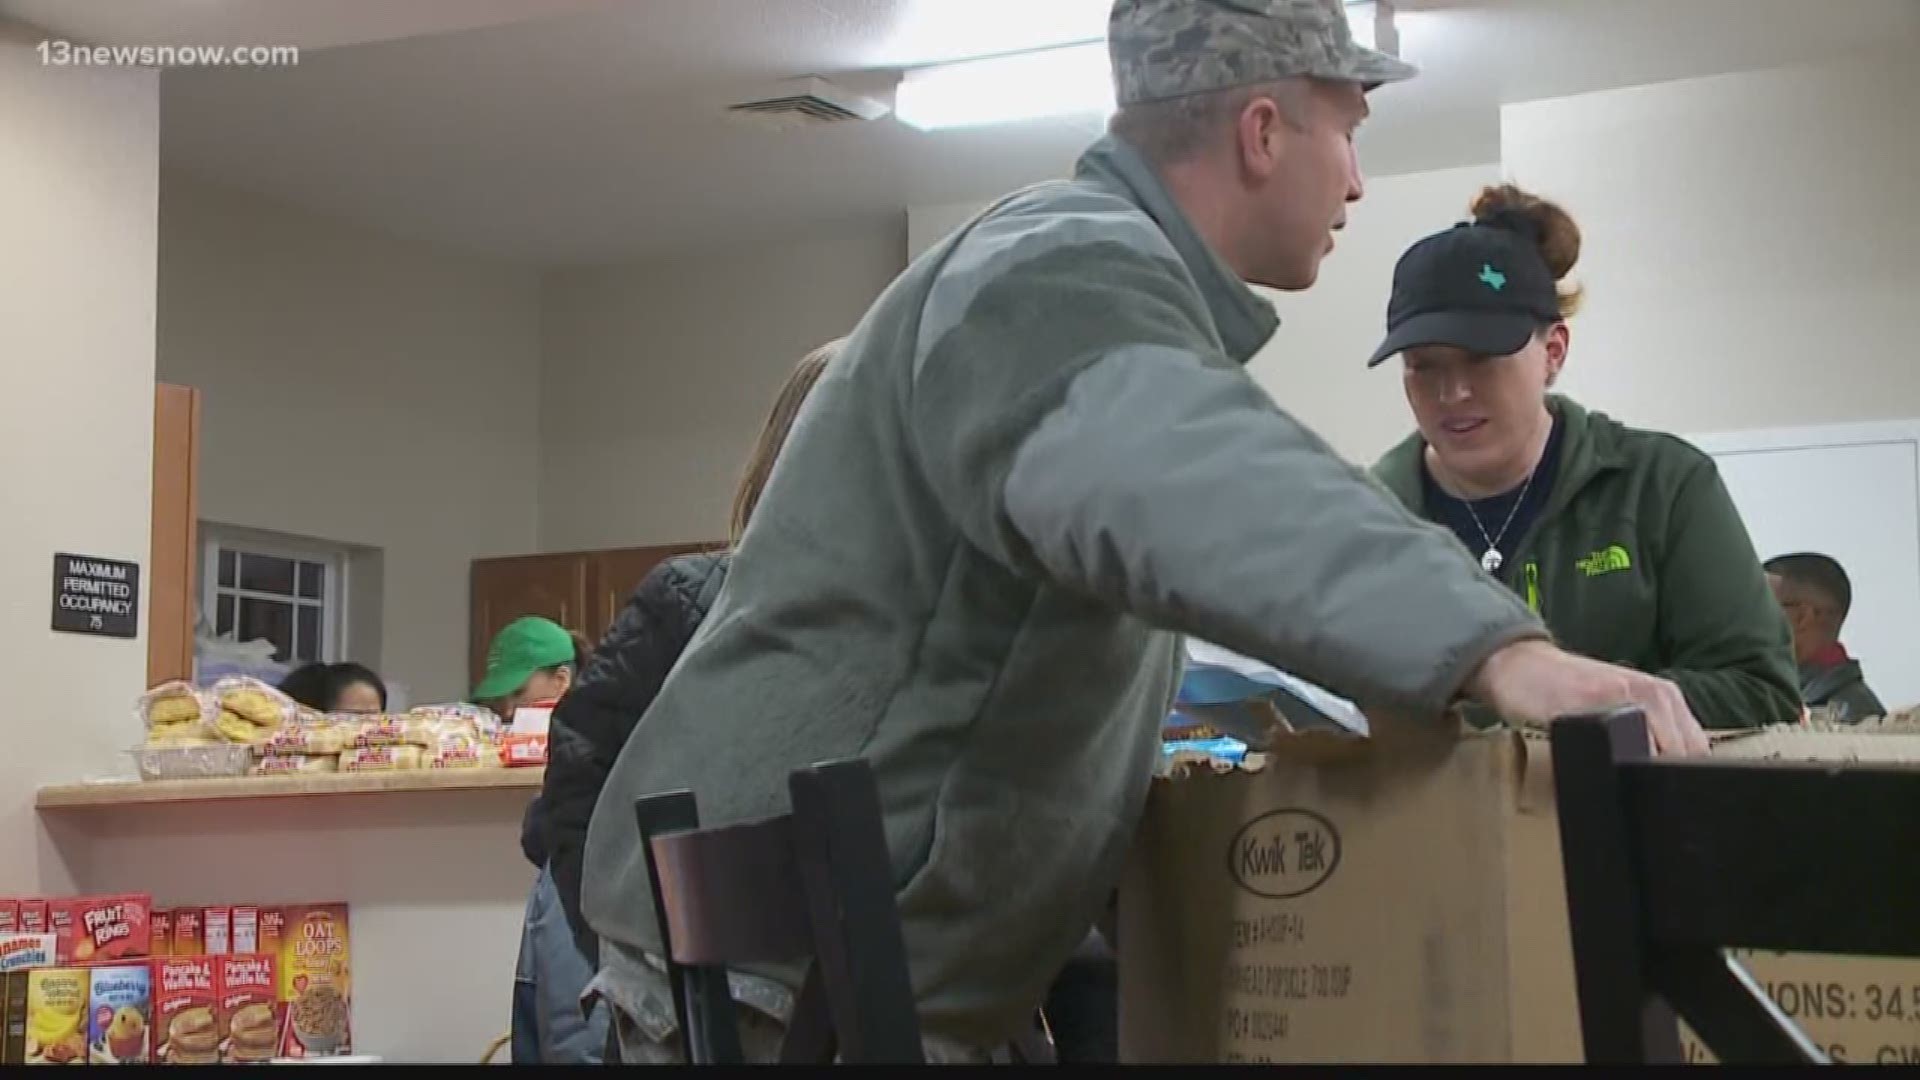 A local Air Force veteran prepared a meal for Coast Guard members in need during the shutdown.